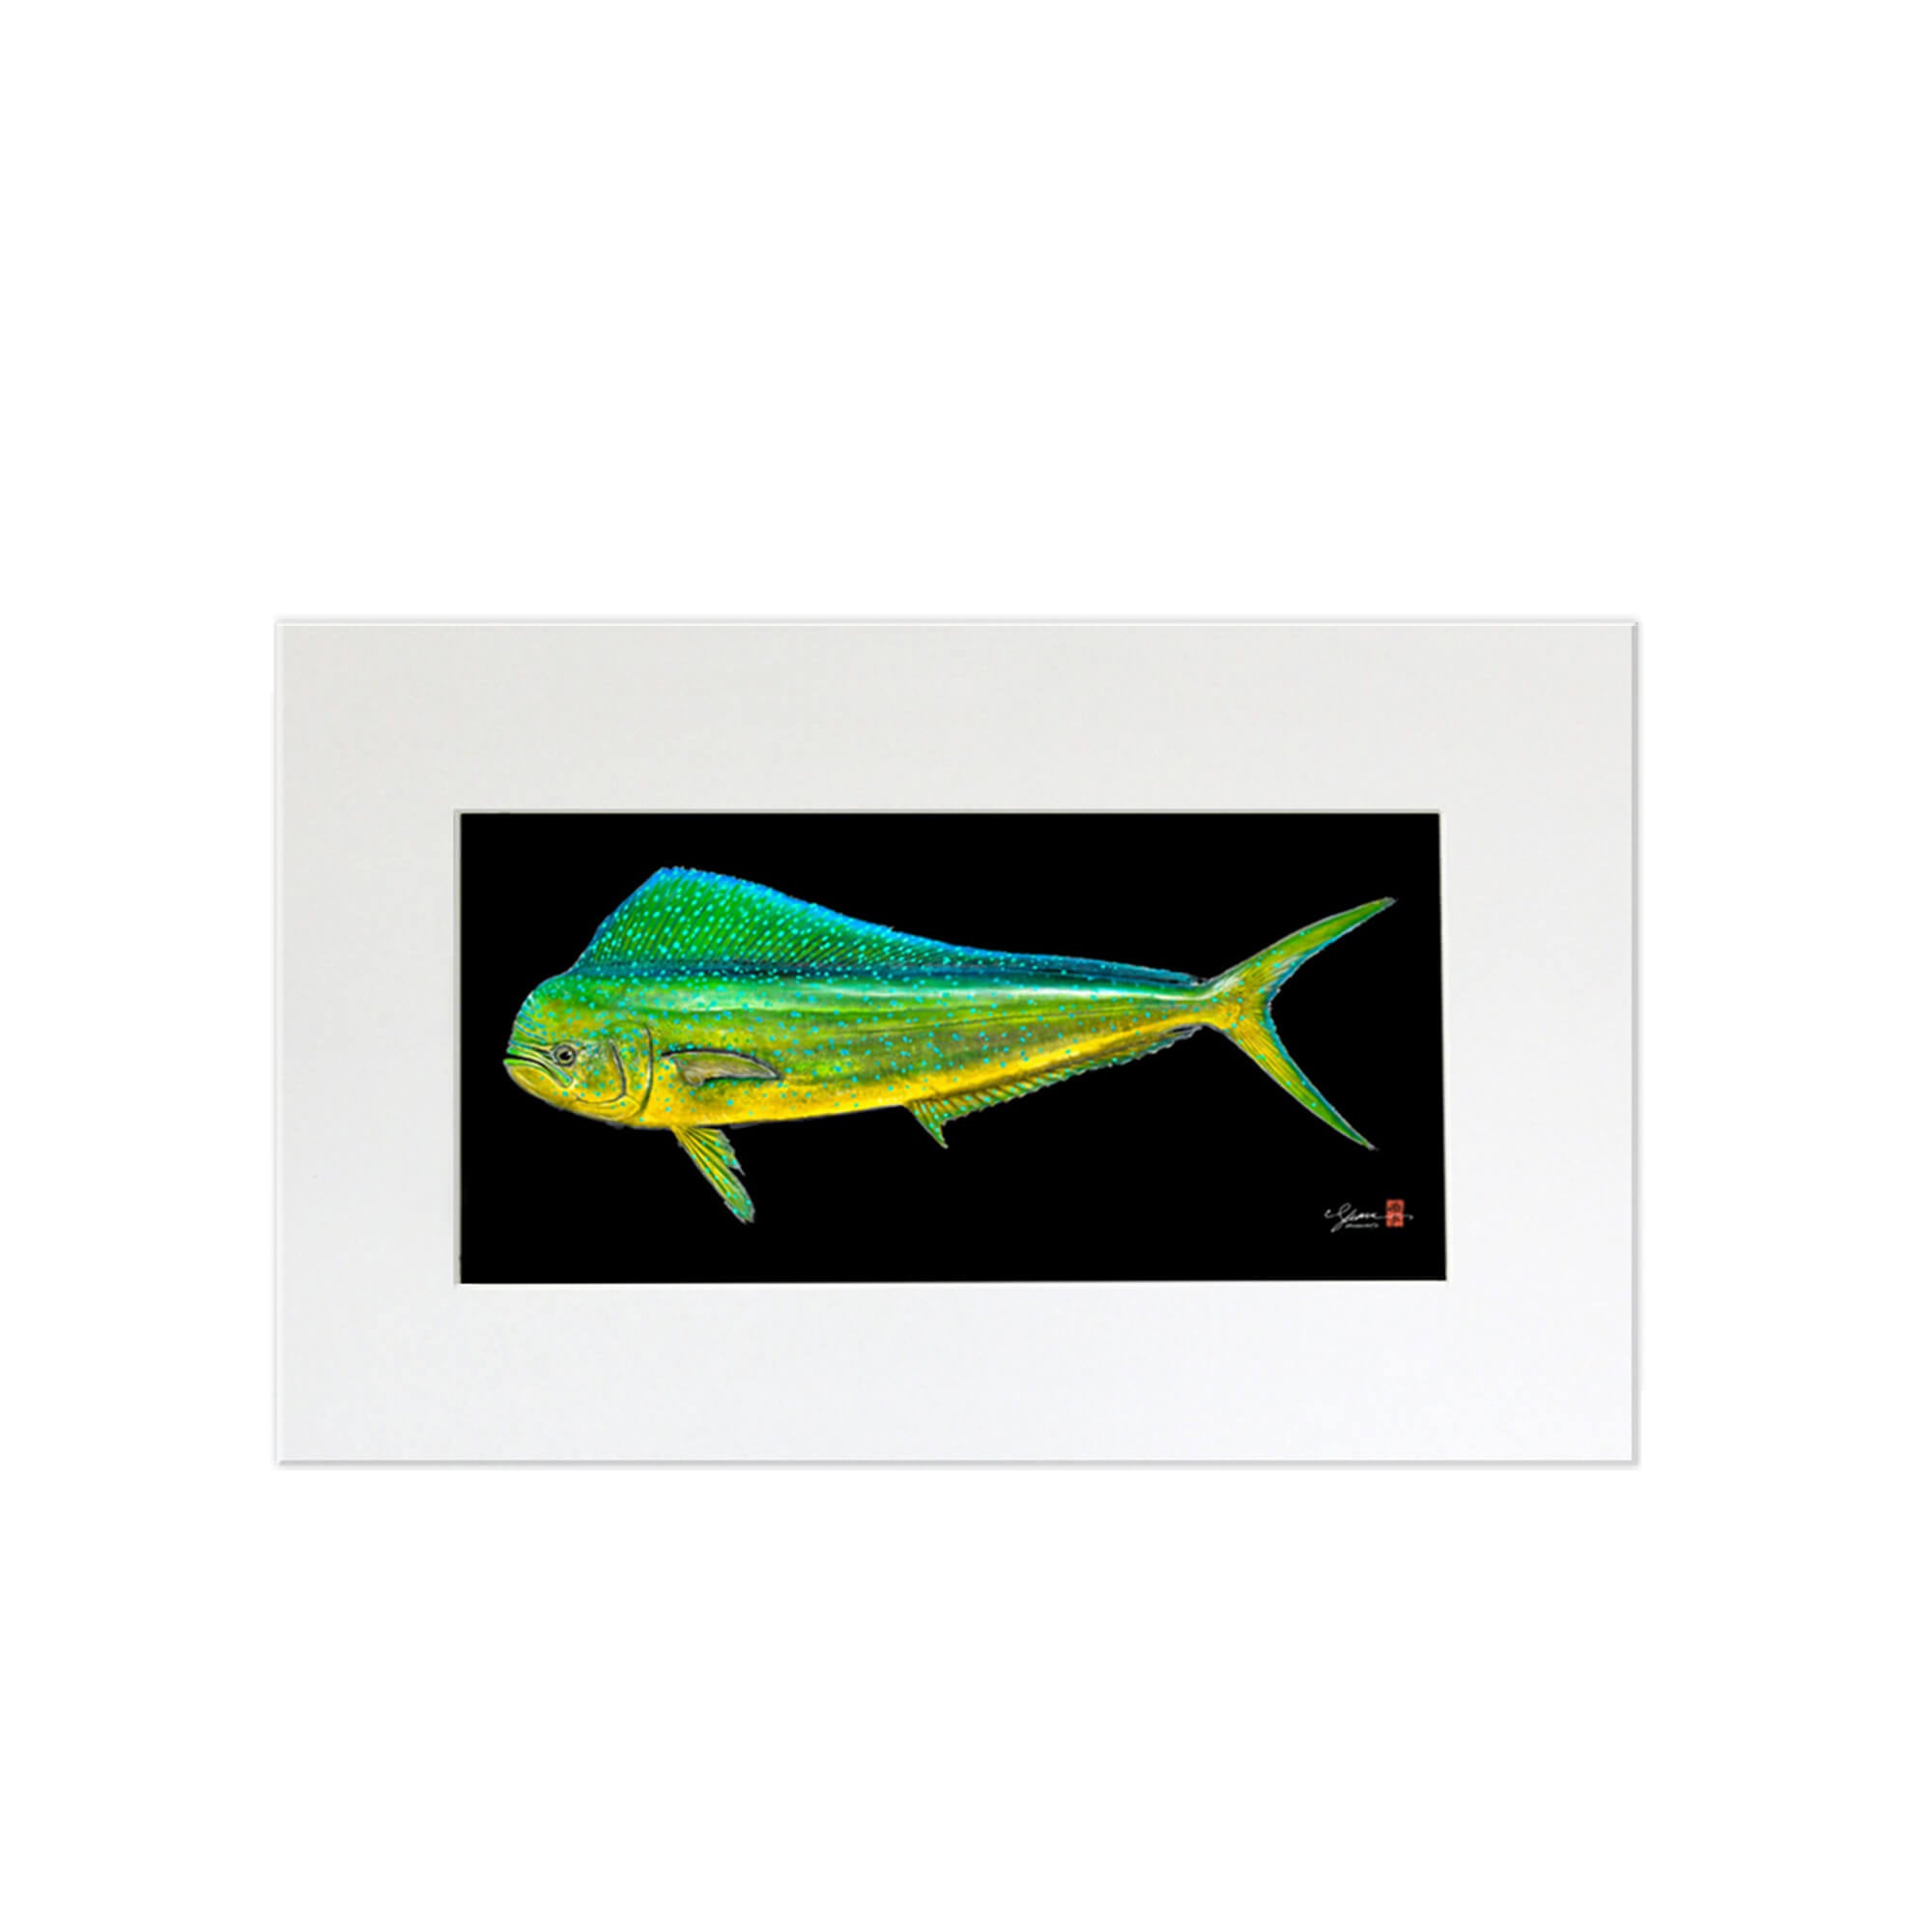 A matted print of a large Mahi Mahi fish (also known as Dolphin Fish or Dorado) distinguished by dazzling colors - golden on the sides, and bright blues and greens on the sides and back by Hawaii Gyotaku artist Shane Hamamoto